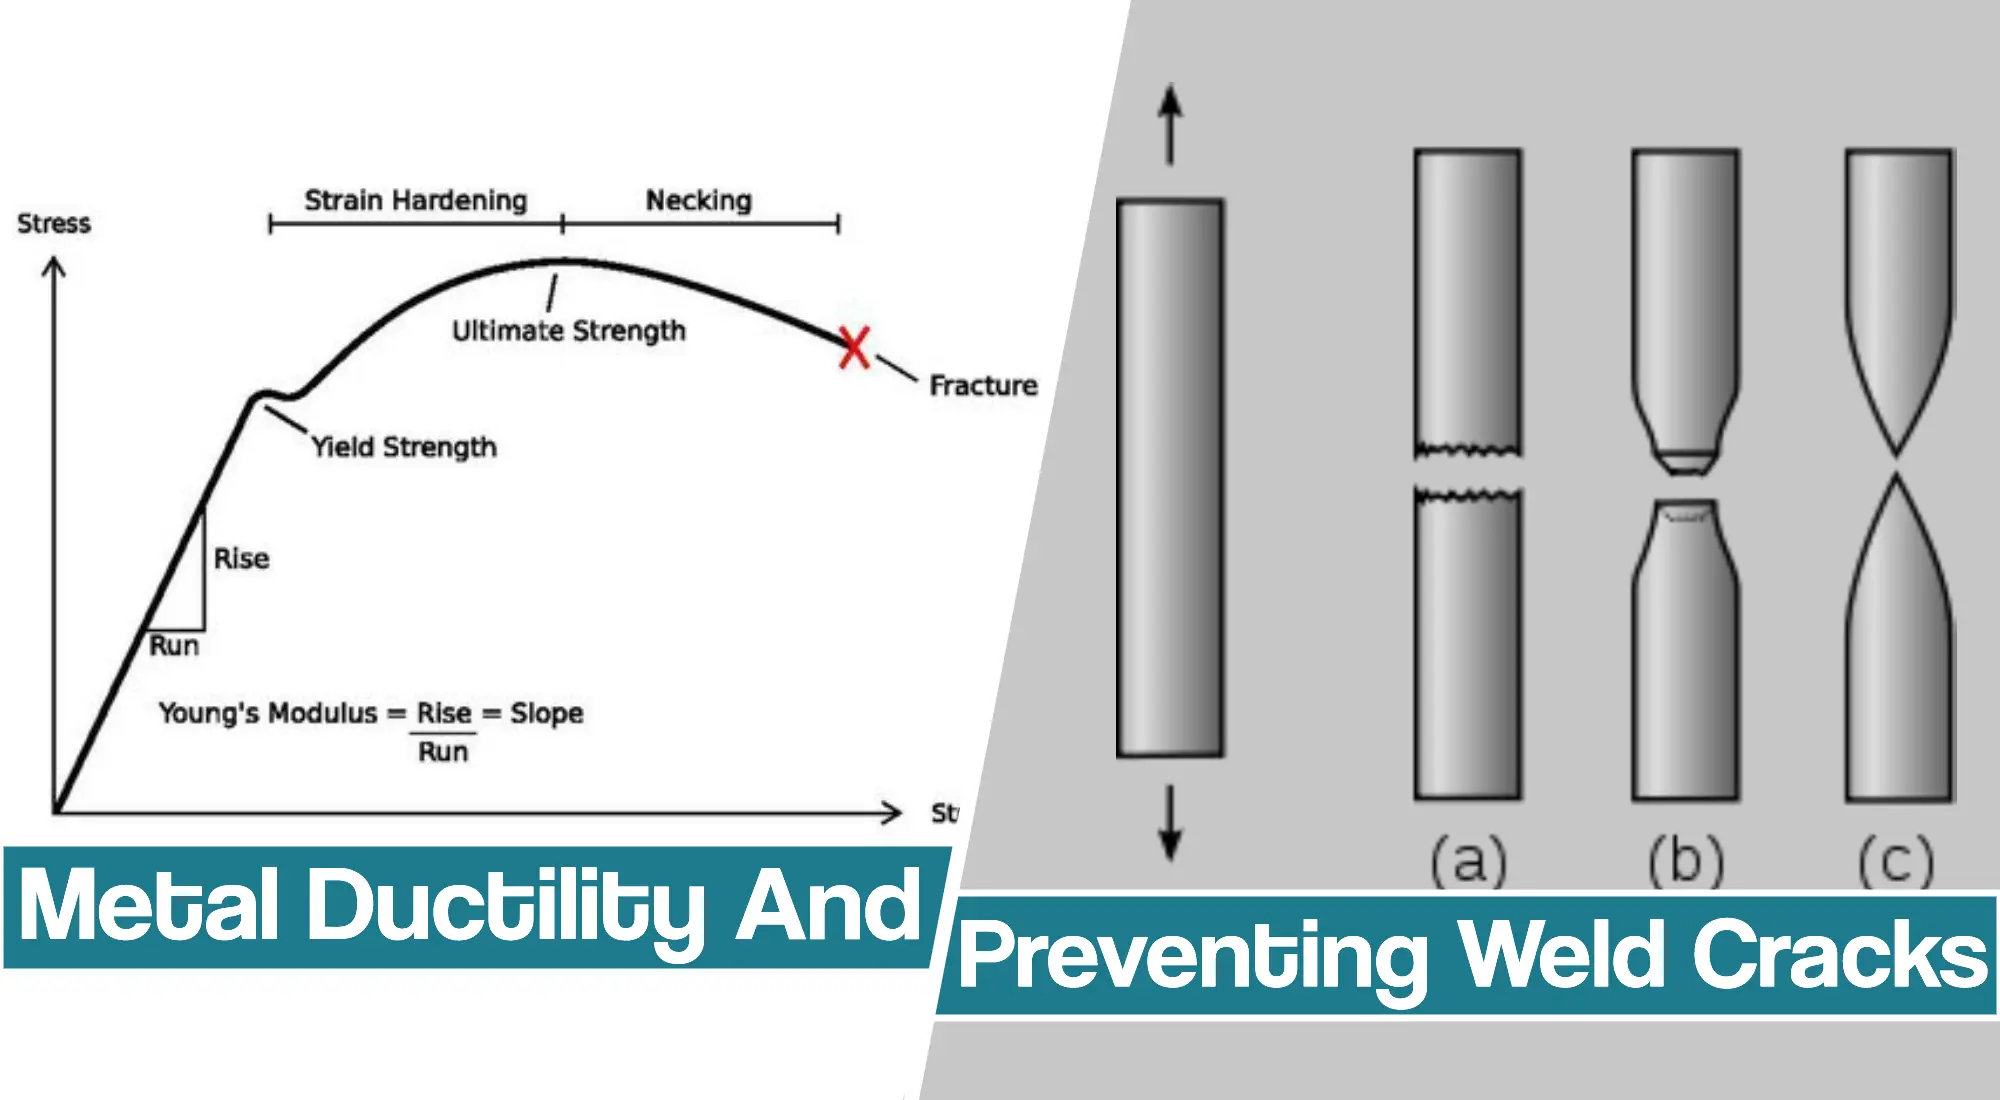 Ductility In Welding And Factors That Encourage Ductility